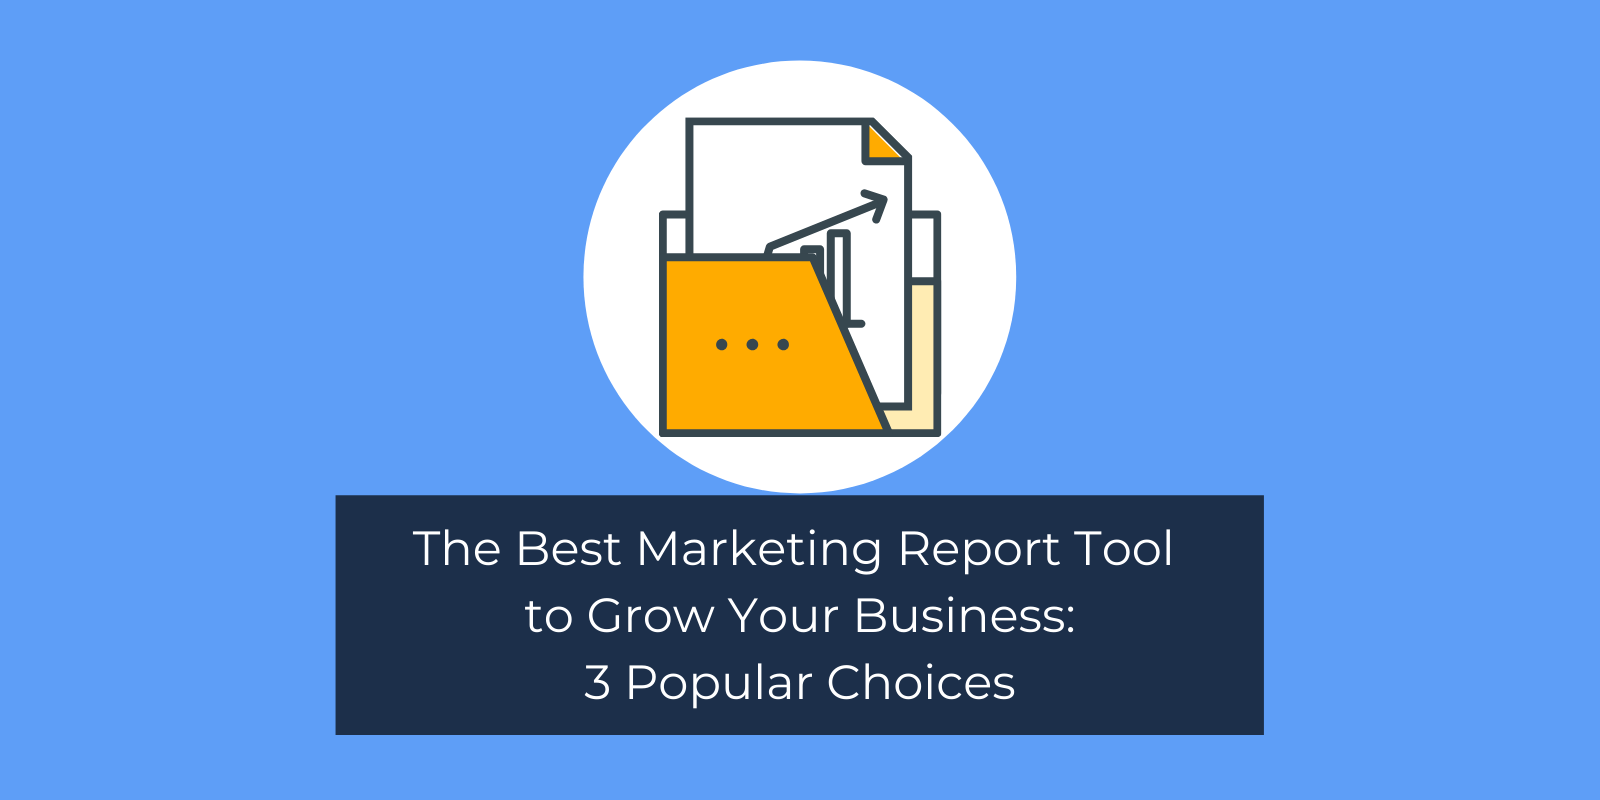 The Best Marketing Report Tool to Grow Your Business: 3 Popular Choices